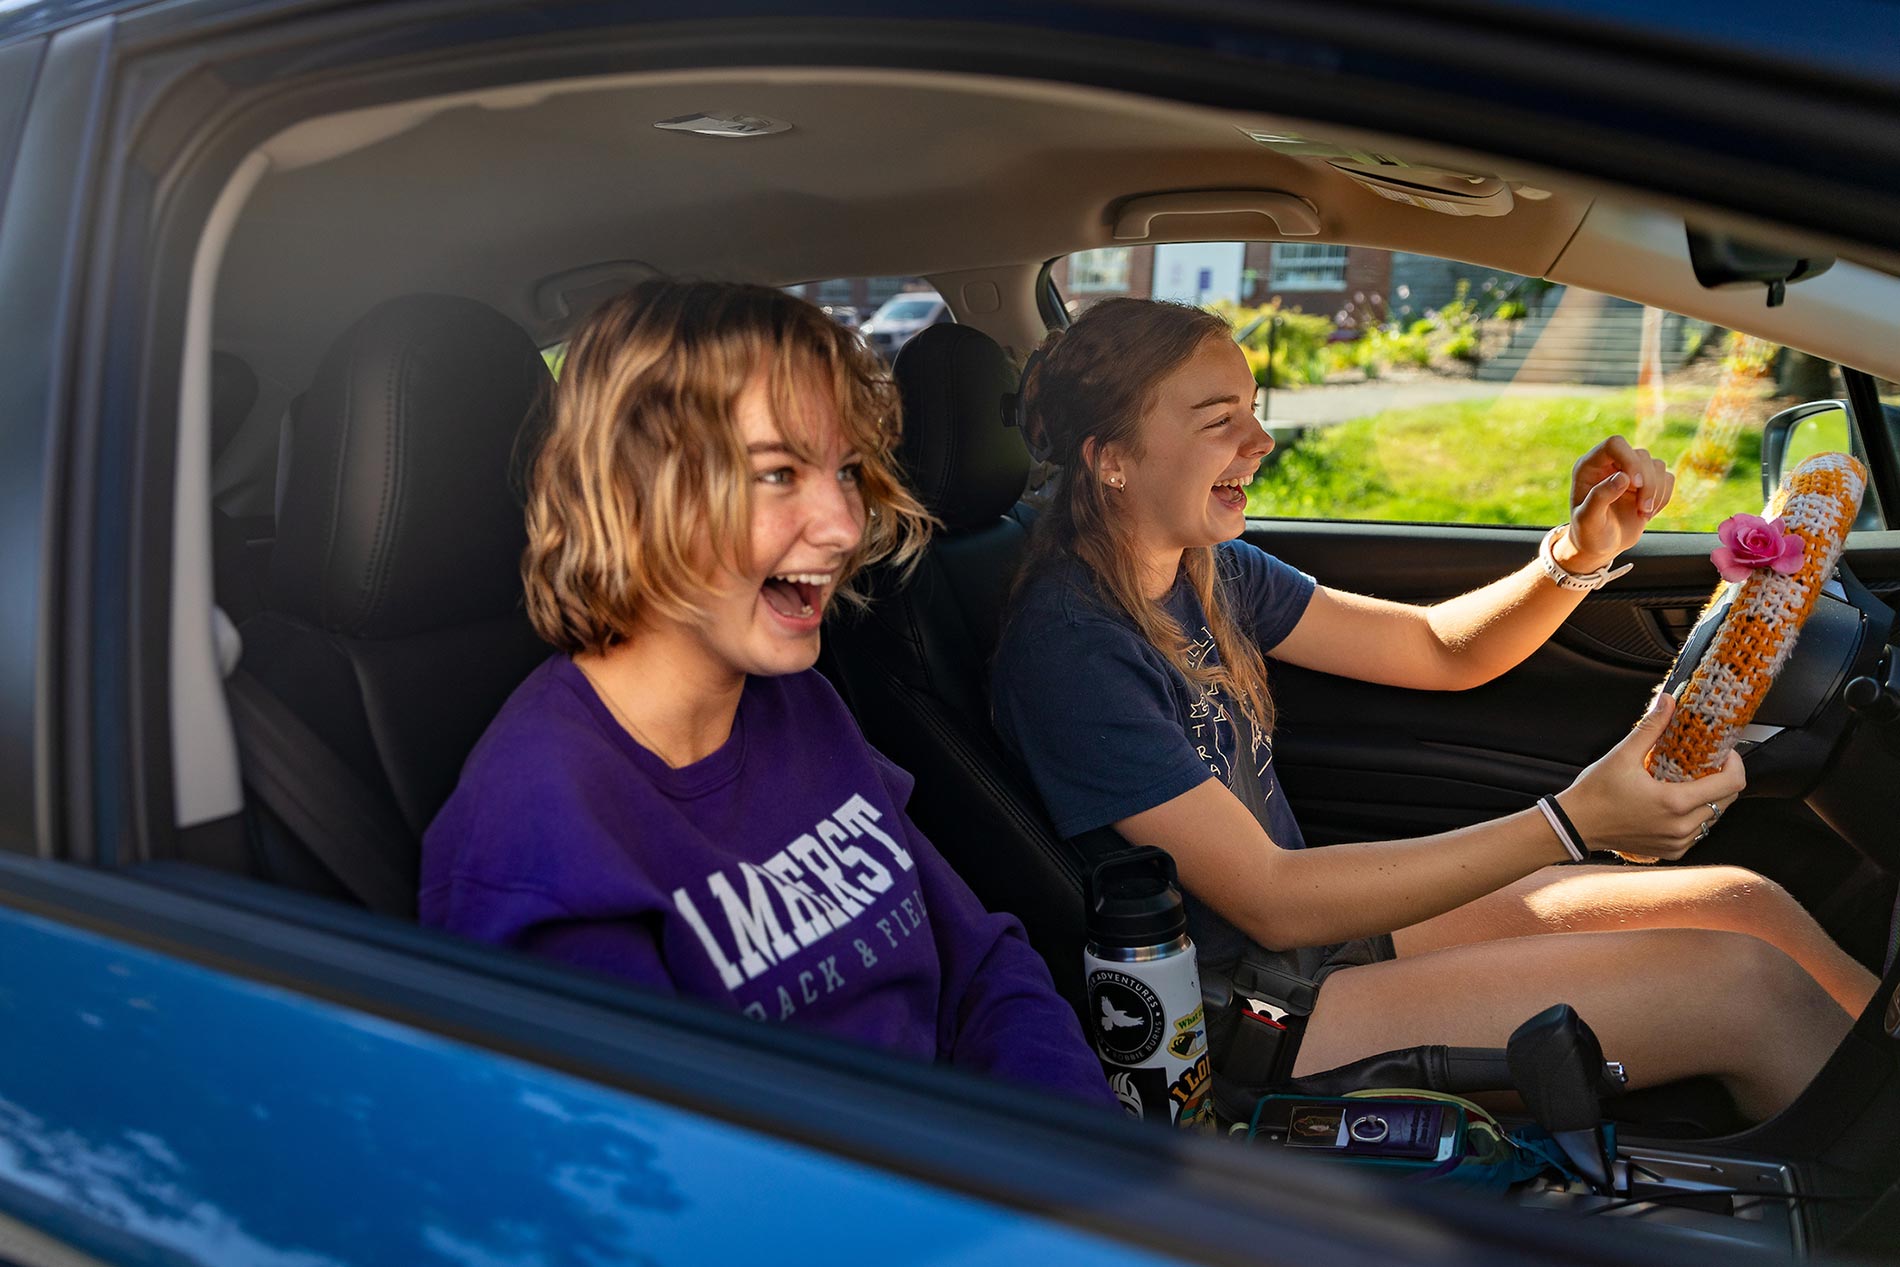 Two young women in laugh while sitting in the front seat of a car.